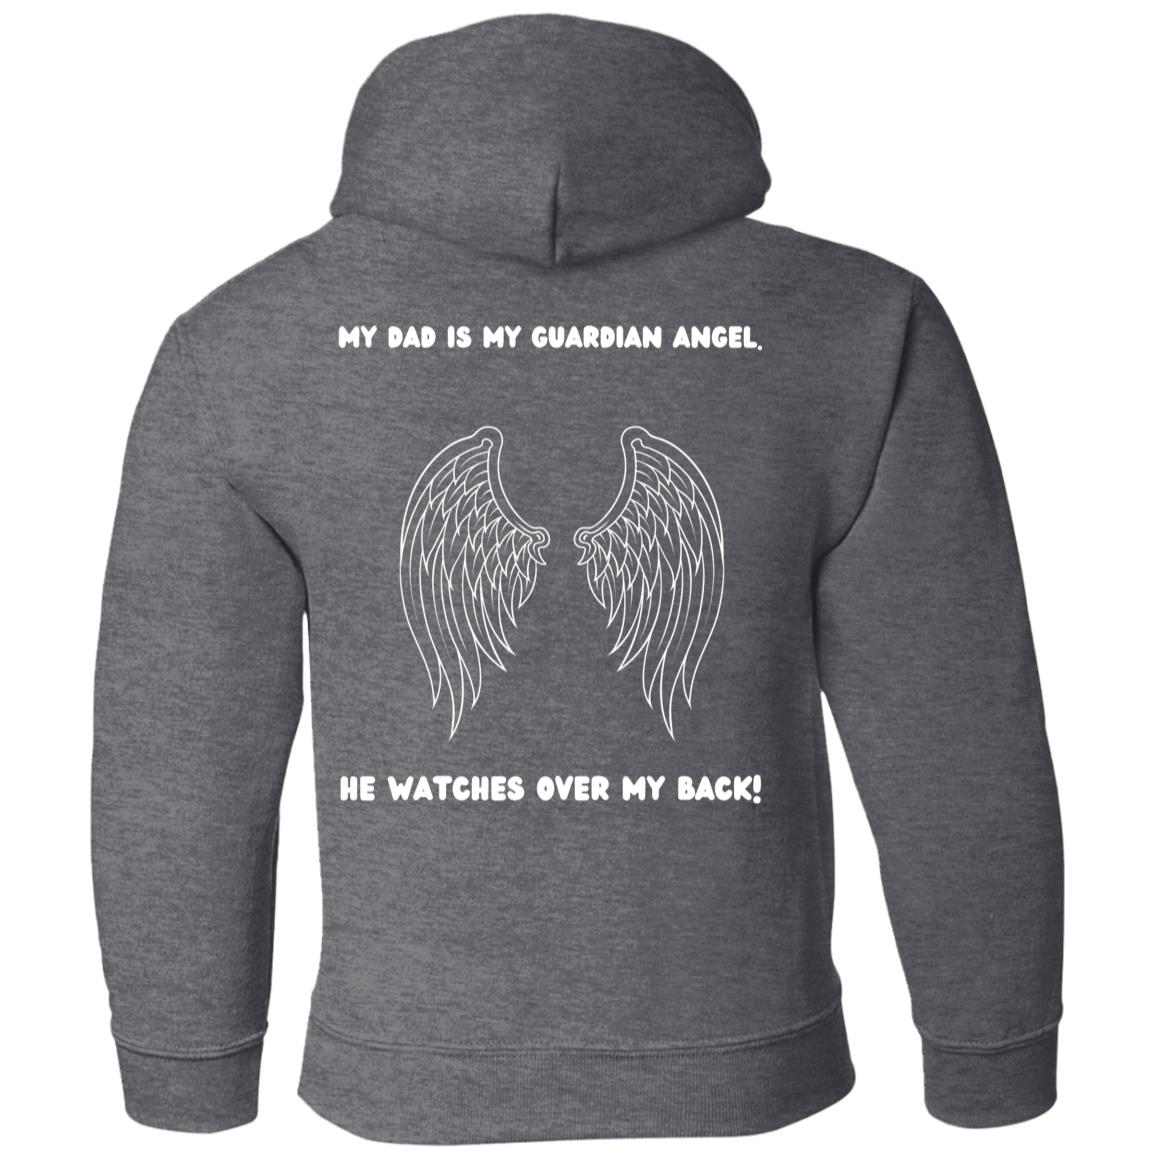 Get trendy with My Dad is MY Guardian Angel Black Text Youth Pullover Hoodie - Sweatshirts available at Good Gift Company. Grab yours for $35 today!